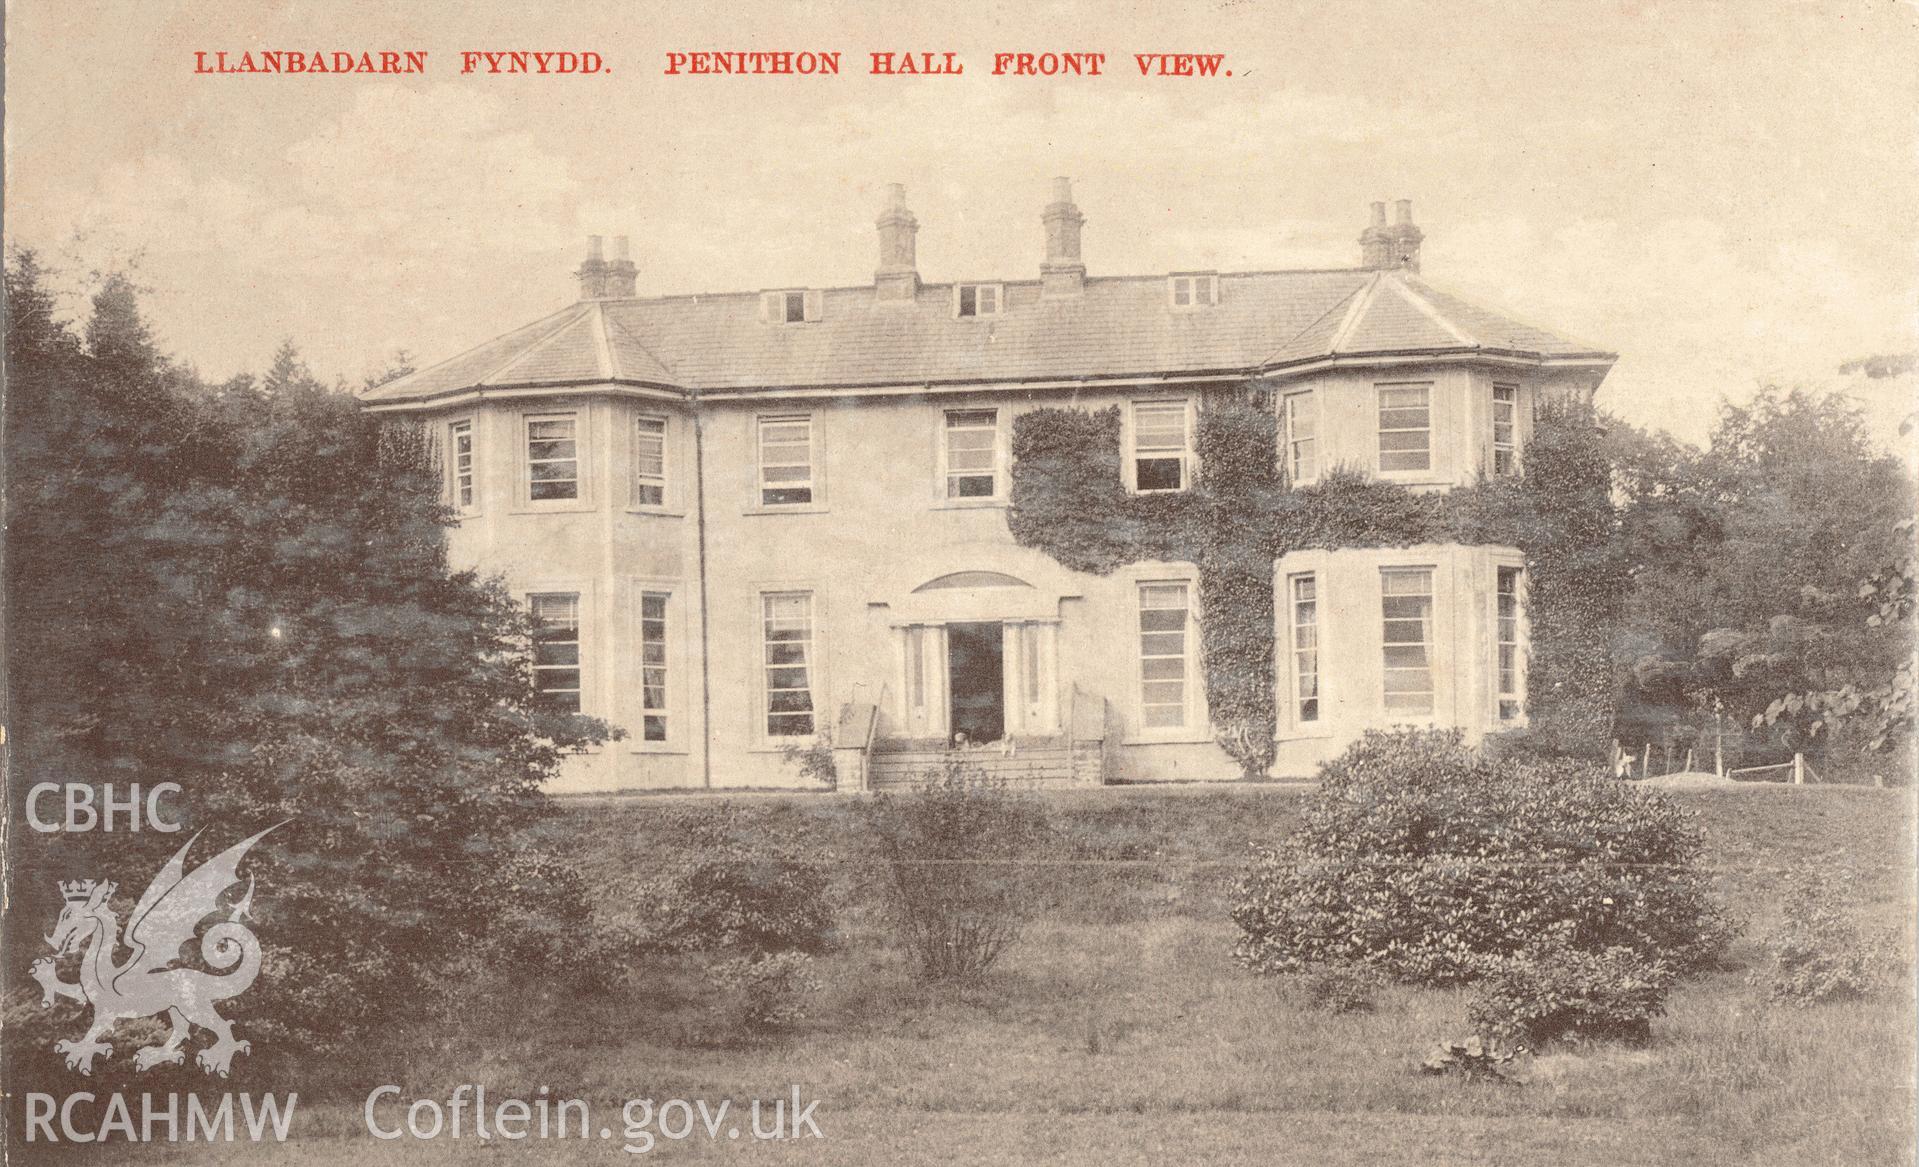 Digitised postcard image of Penithon hall, Front view, Park & Son, Newtown. Produced by Parks and Gardens Data Services, from an original item in the Peter Davis Collection at Parks and Gardens UK. We hold only web-resolution images of this collection, suitable for viewing on screen and for research purposes only. We do not hold the original images, or publication quality scans.